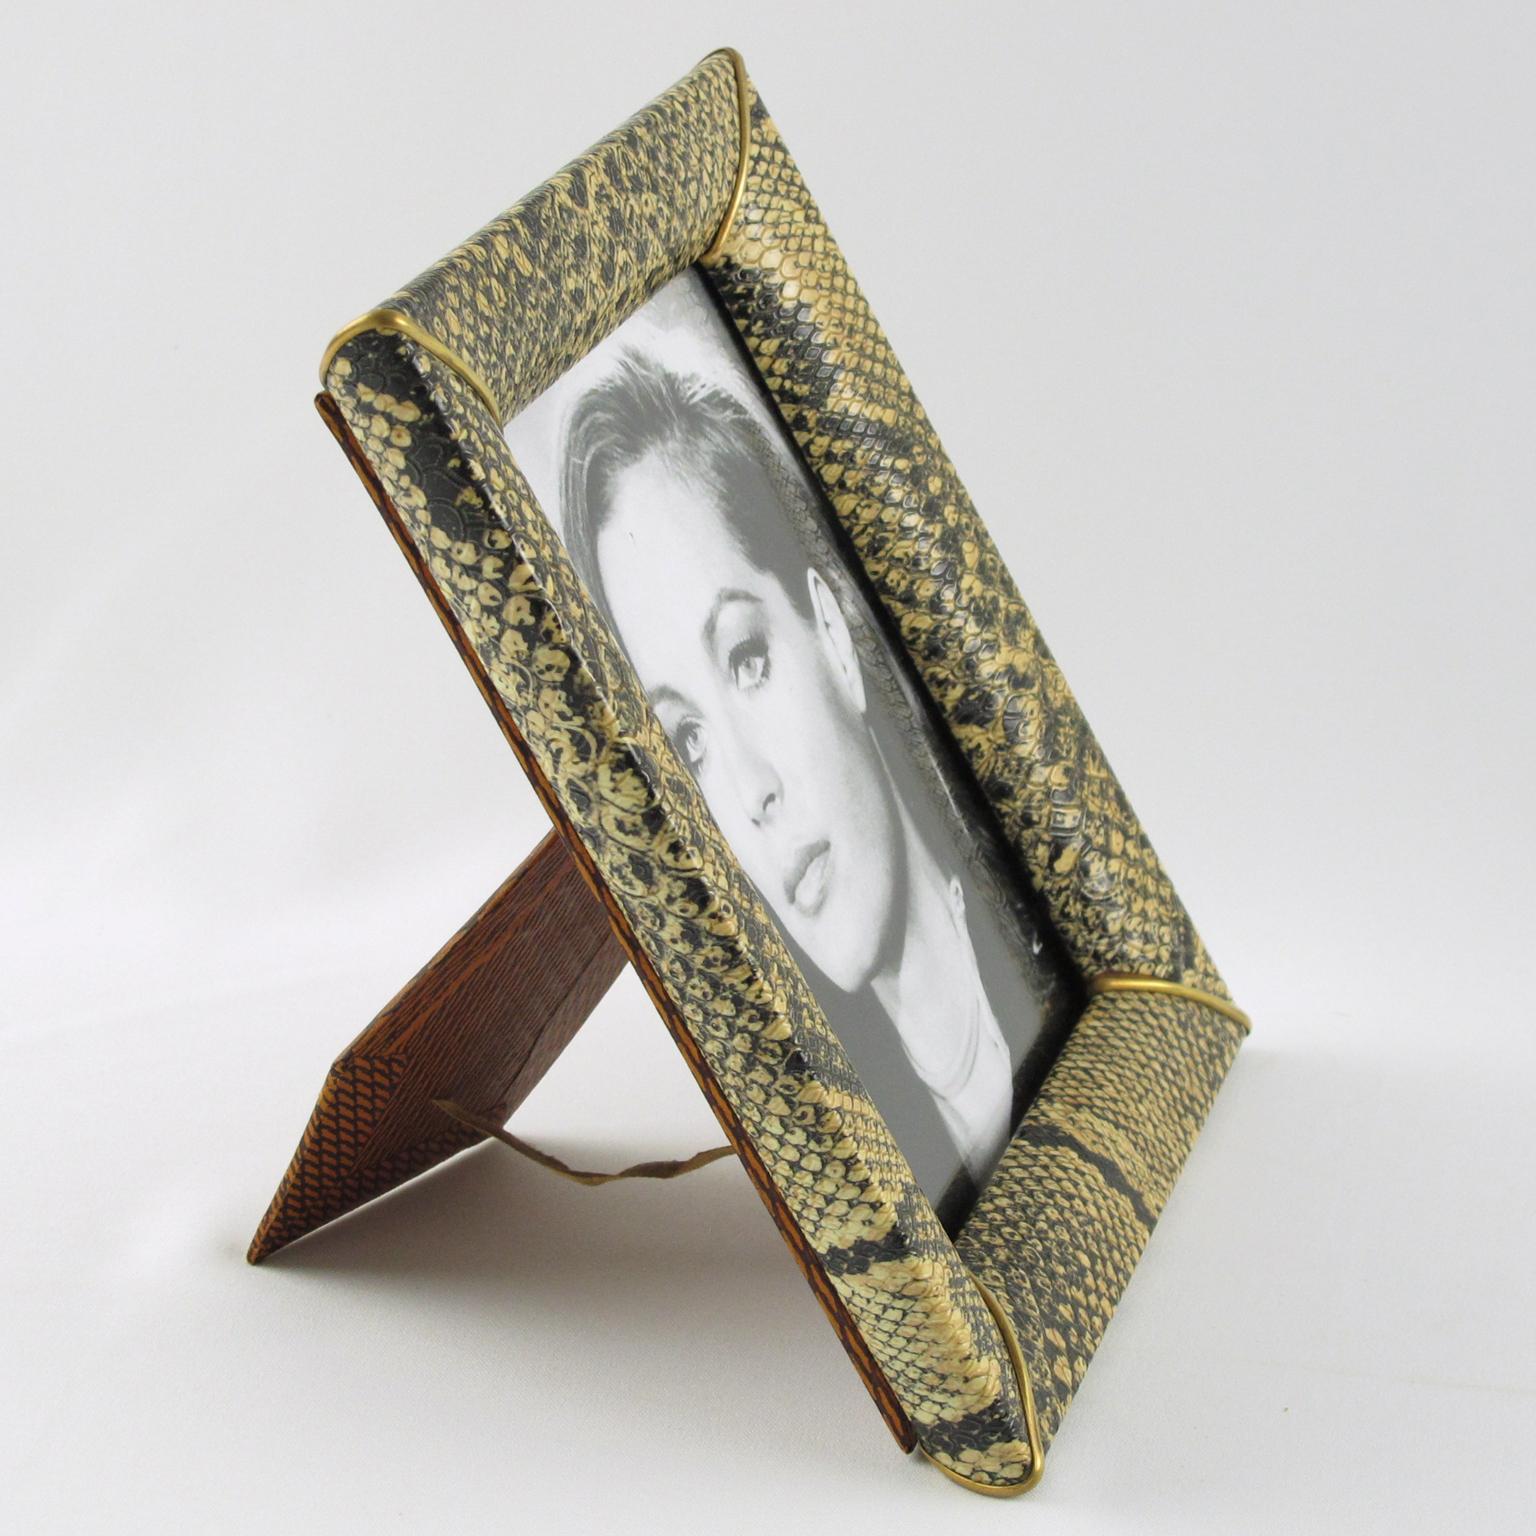 Lovely 1960s modern French picture photo frame. Decorative imitation leather or vinyl with faux python snakeskin textured pattern and brass accents. Easel at the back. The frame can be placed in a portrait or landscape